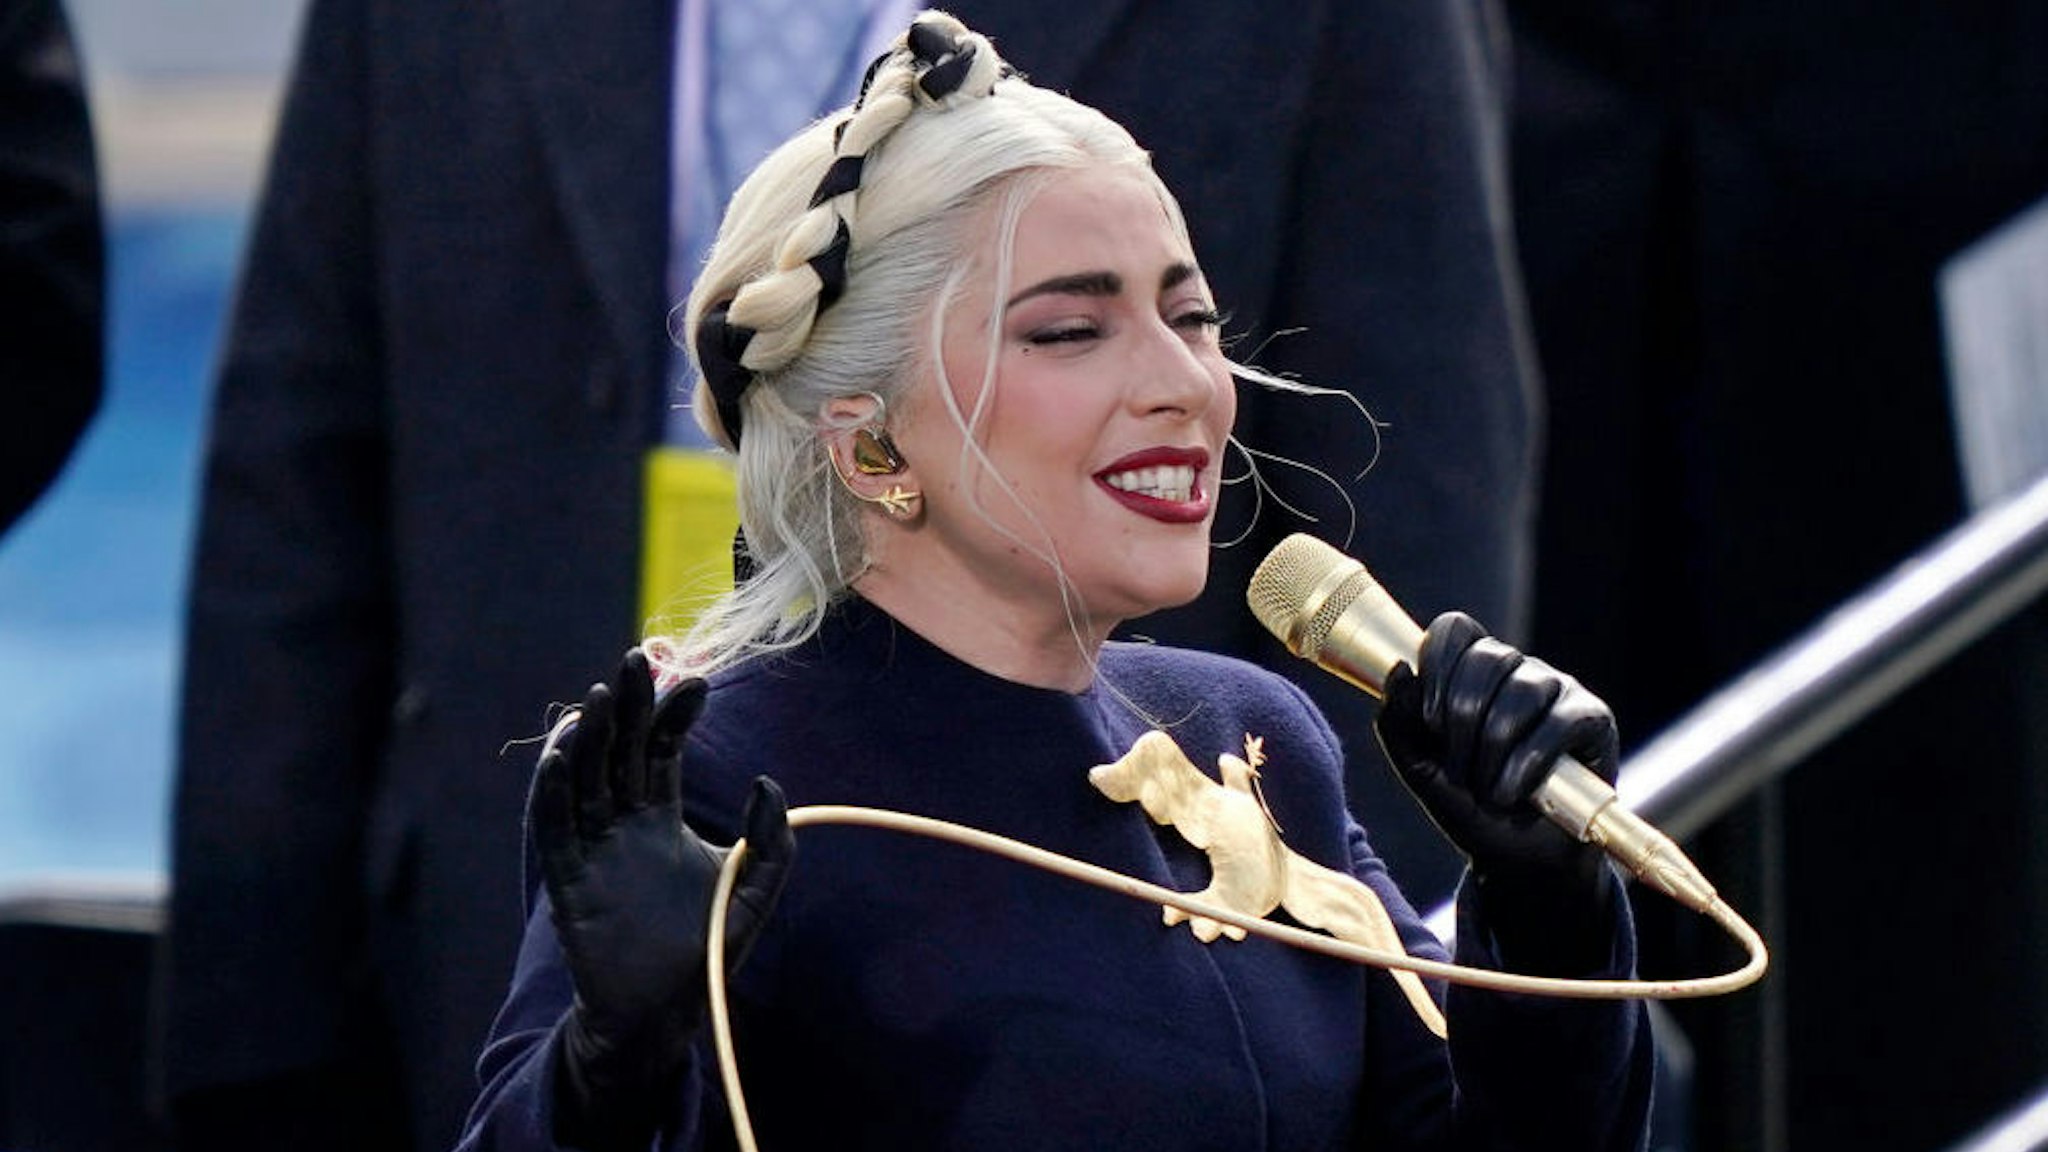 WASHINGTON, DC - JANUARY 20: Lady Gaga sings the National Anthem at the inauguration of U.S. President-elect Joe Biden on the West Front of the U.S. Capitol on January 20, 2021 in Washington, DC. During today's inauguration ceremony Joe Biden becomes the 46th president of the United States.